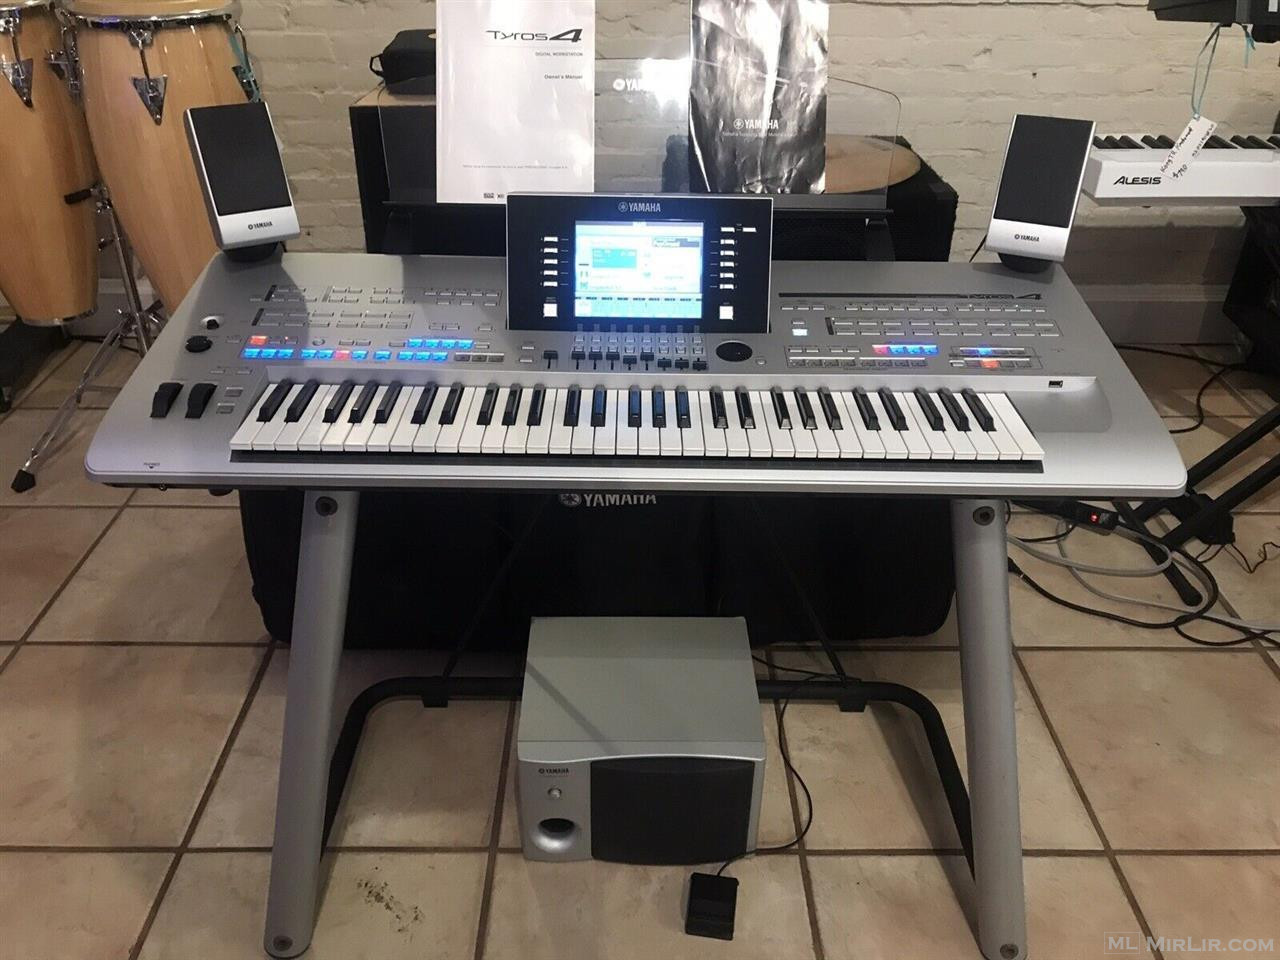 Yamaha Tyros 4 Keyboard with Stand, Sub, Speakers, Music Sta